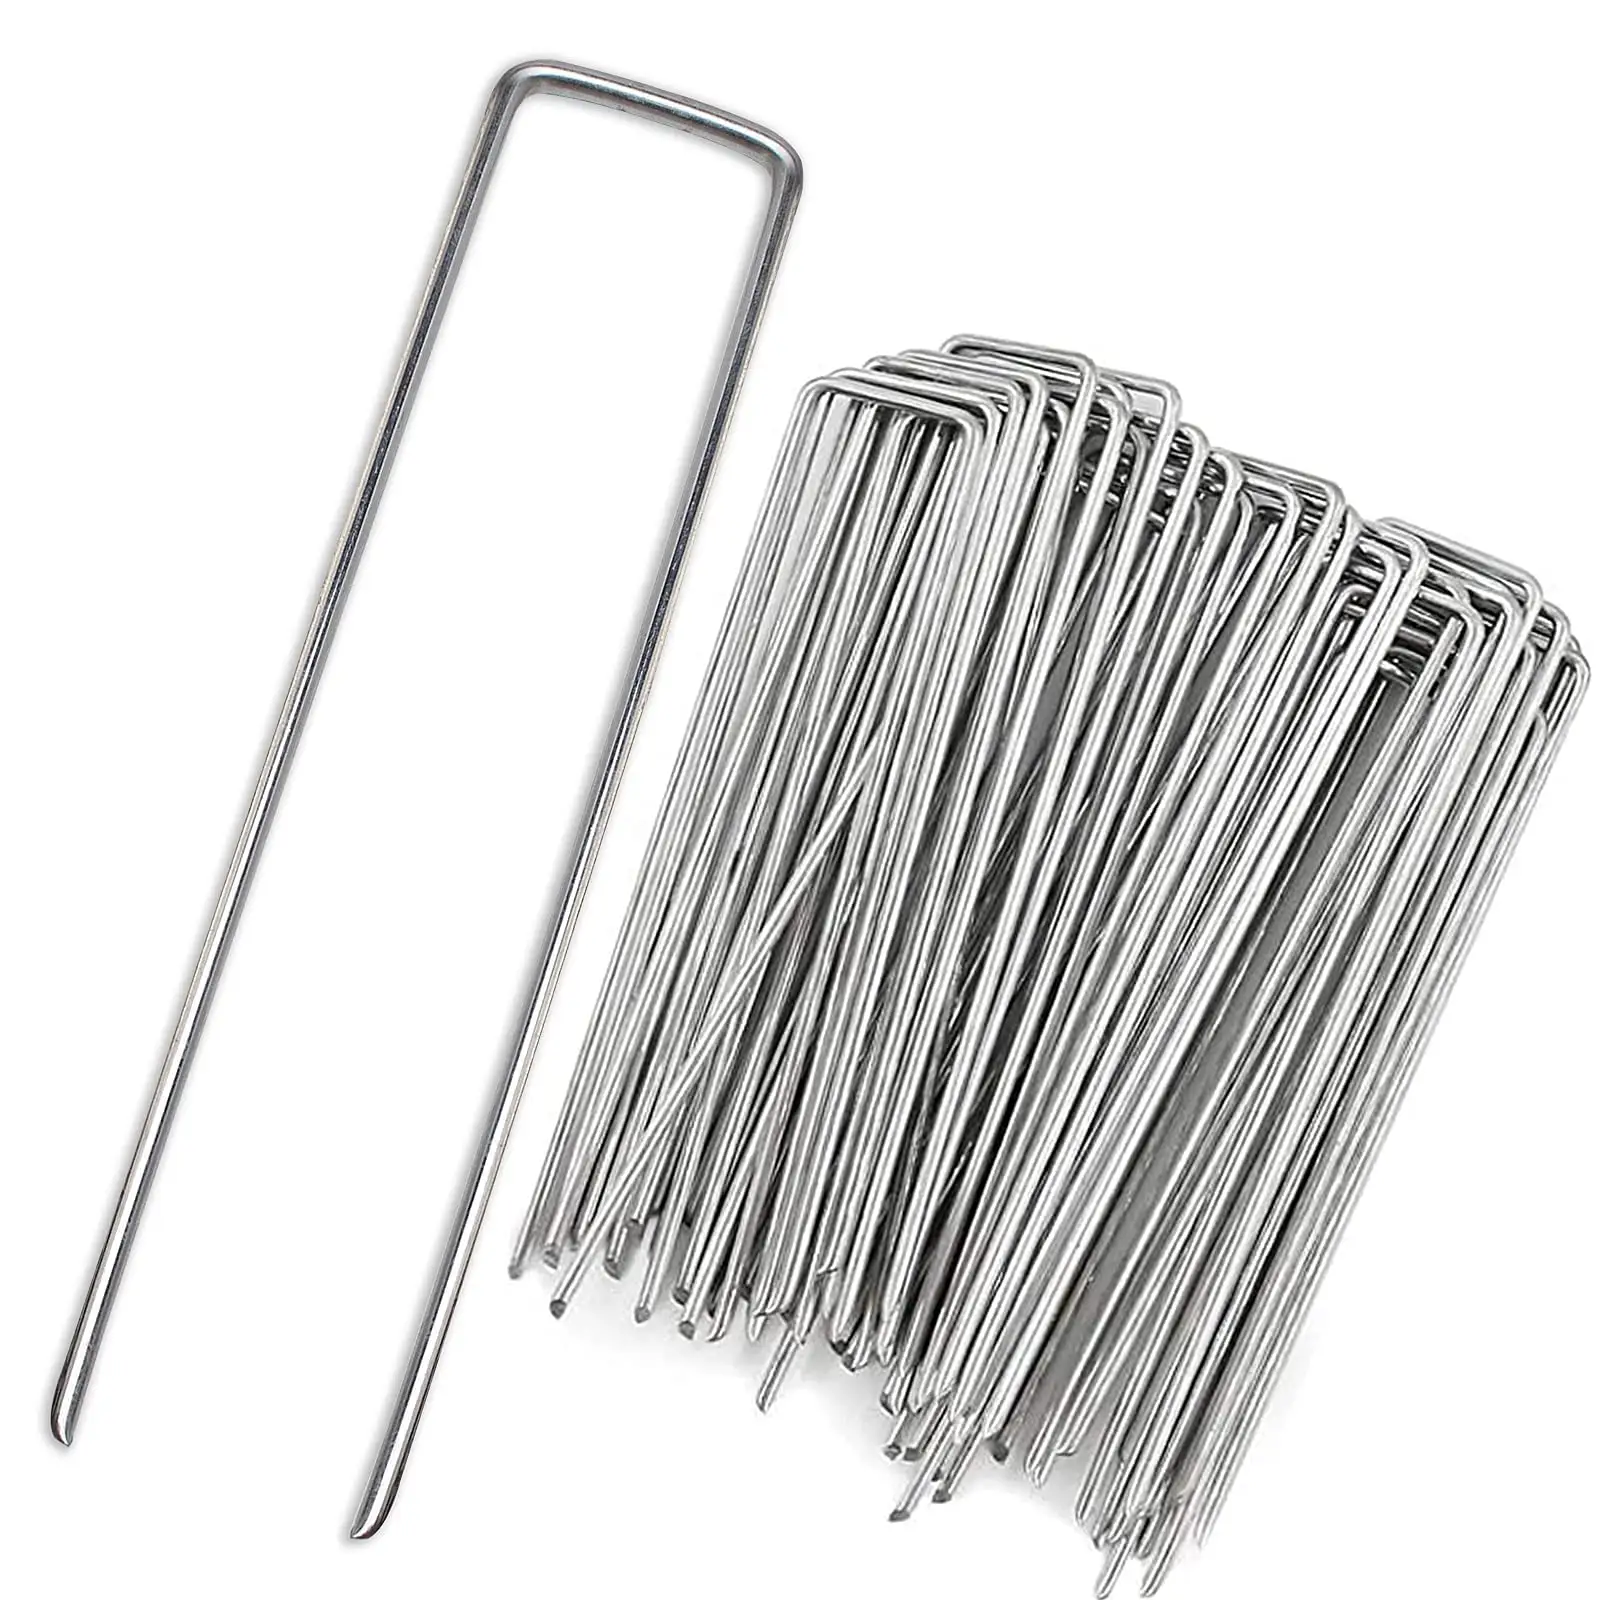 Heavy-Duty Galvanized Steel Garden Landscape Fabric Pins are Used to Fixing Weed Barrier, Artificial Lawn, Patio Rug, Etc